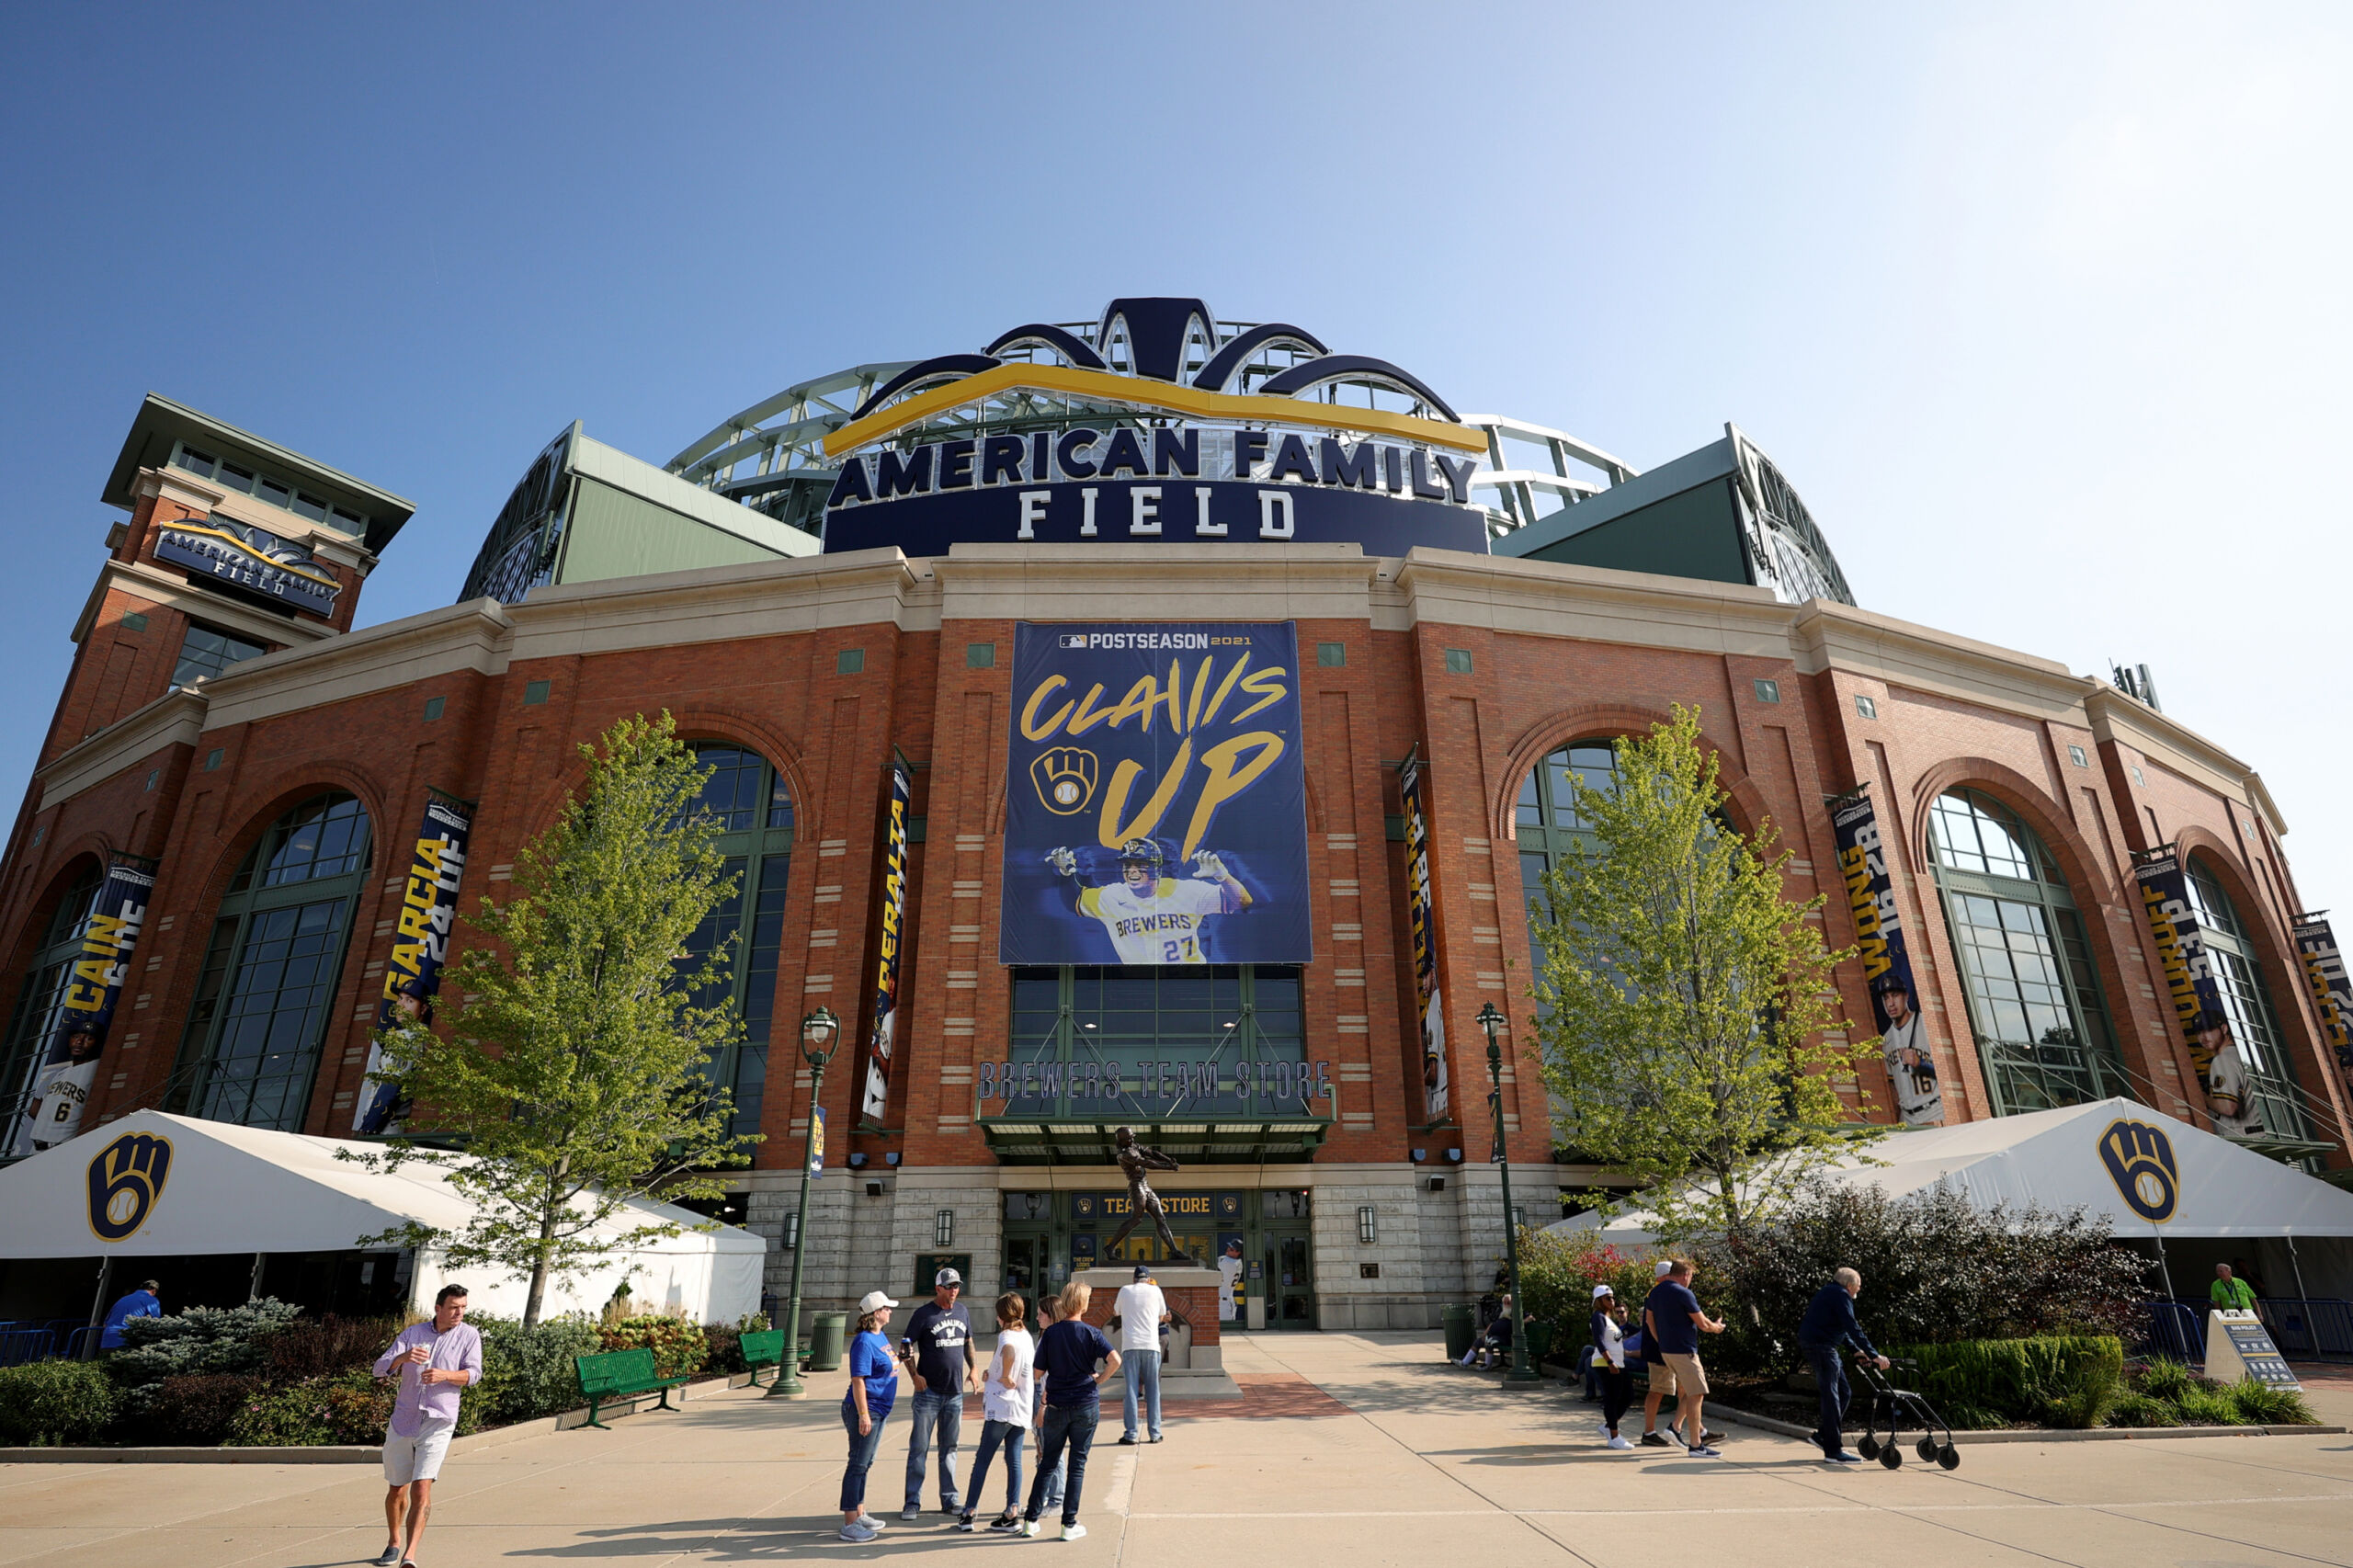 Milwaukee-area taxpayers might get new bill for ballpark improvements